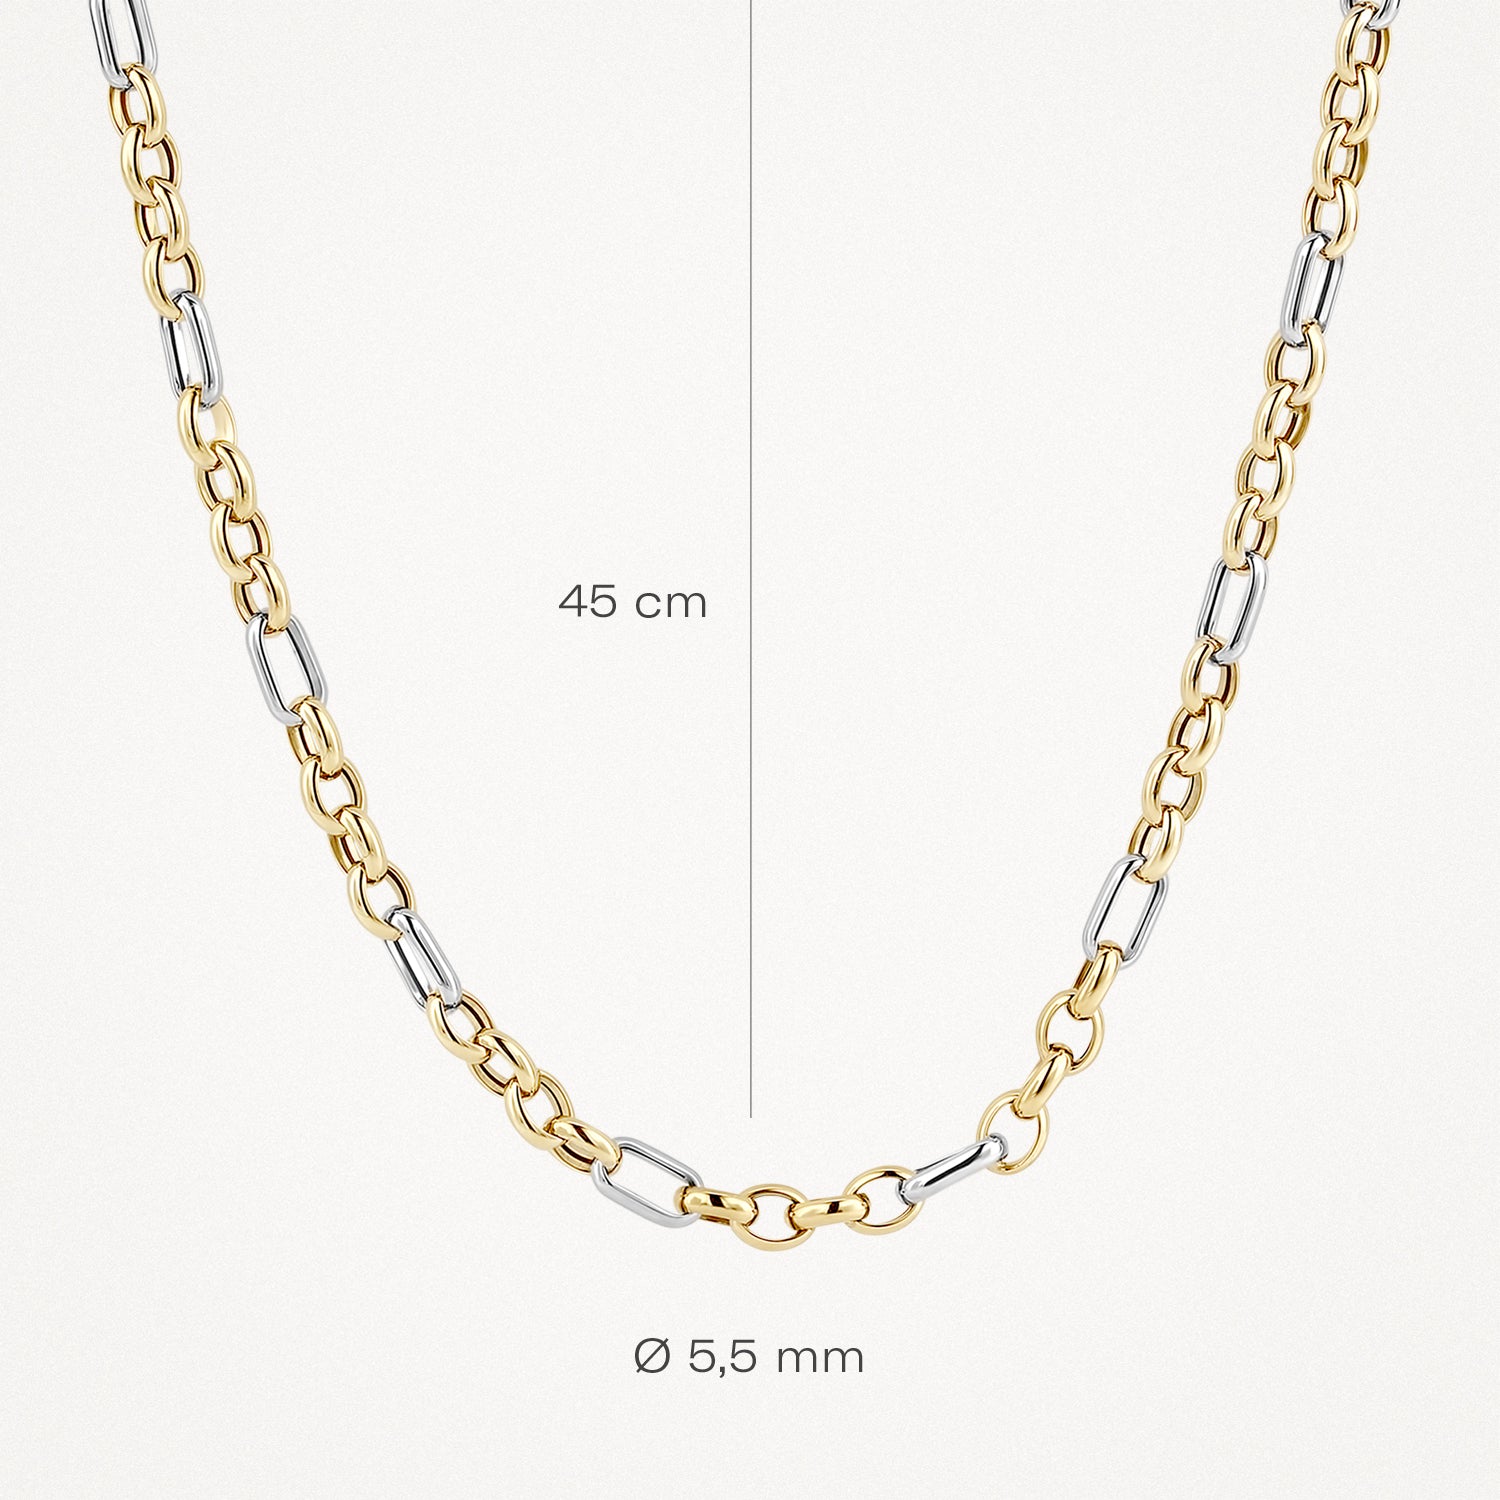 Necklace 3100BGO - 14k Yellow and White Gold